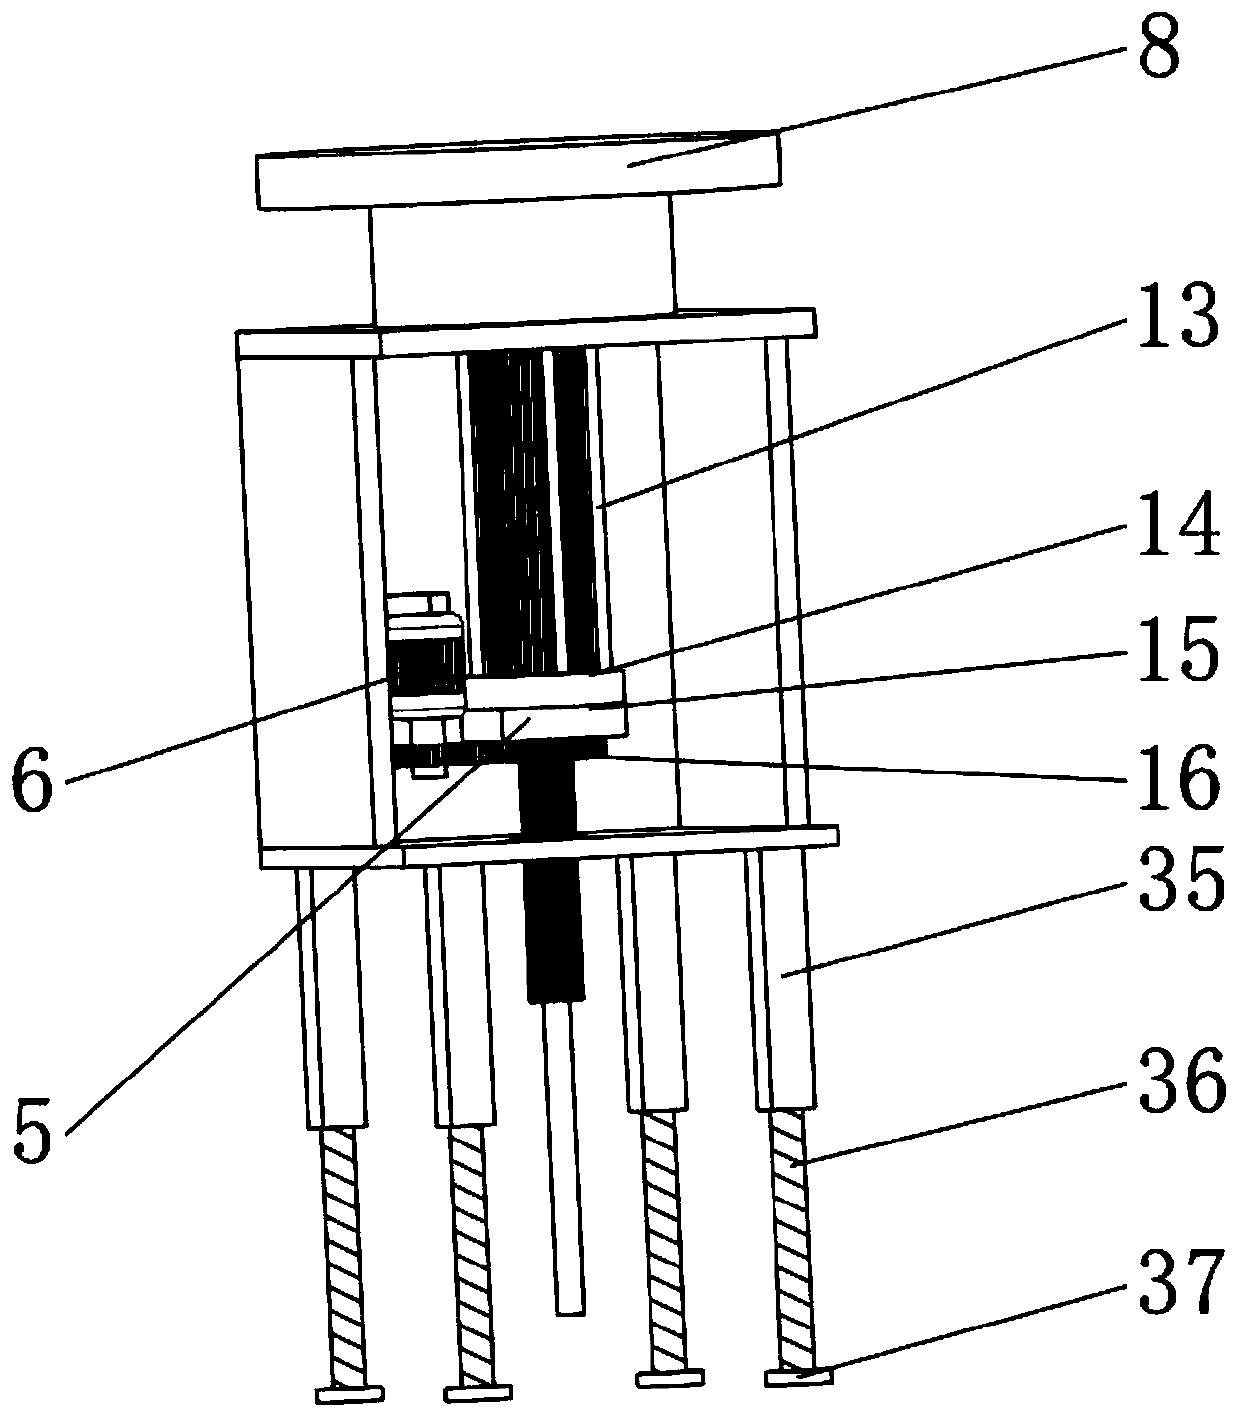 Acupuncture treatment device